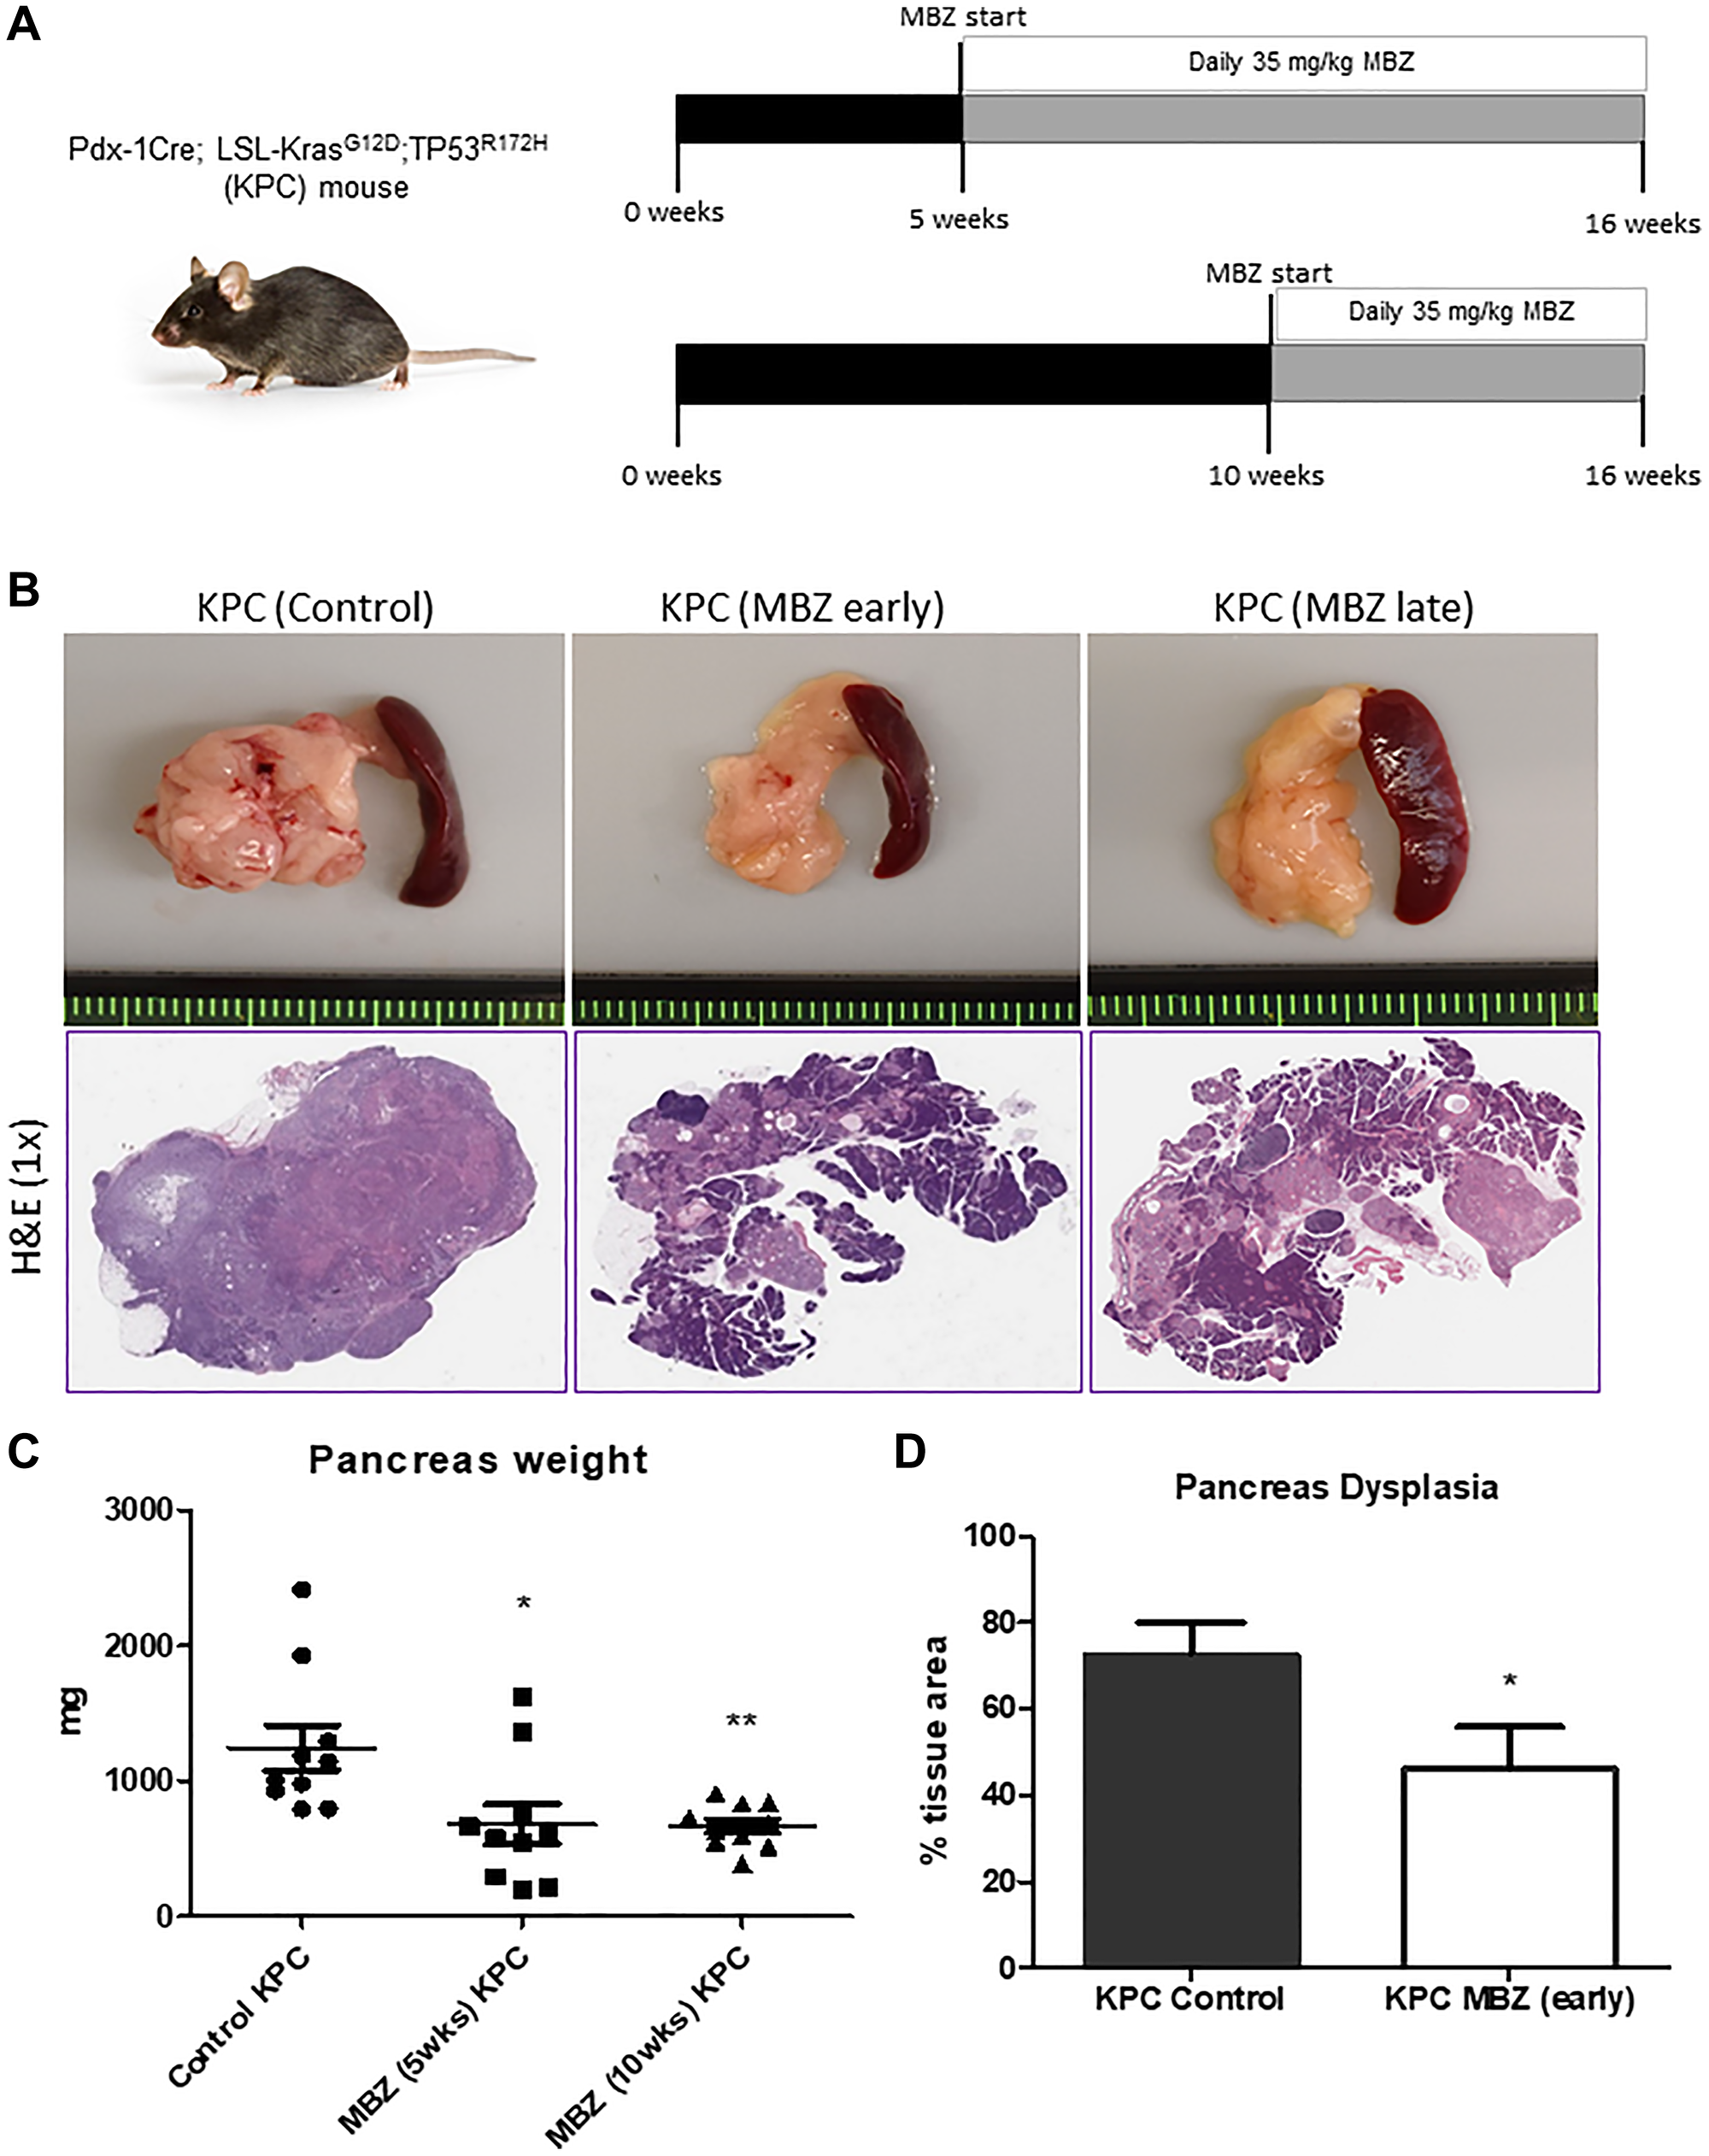 Mebendazole suppressed pancreatic tumor progression and incidence in the KPC mouse as an early and late intervention agent.